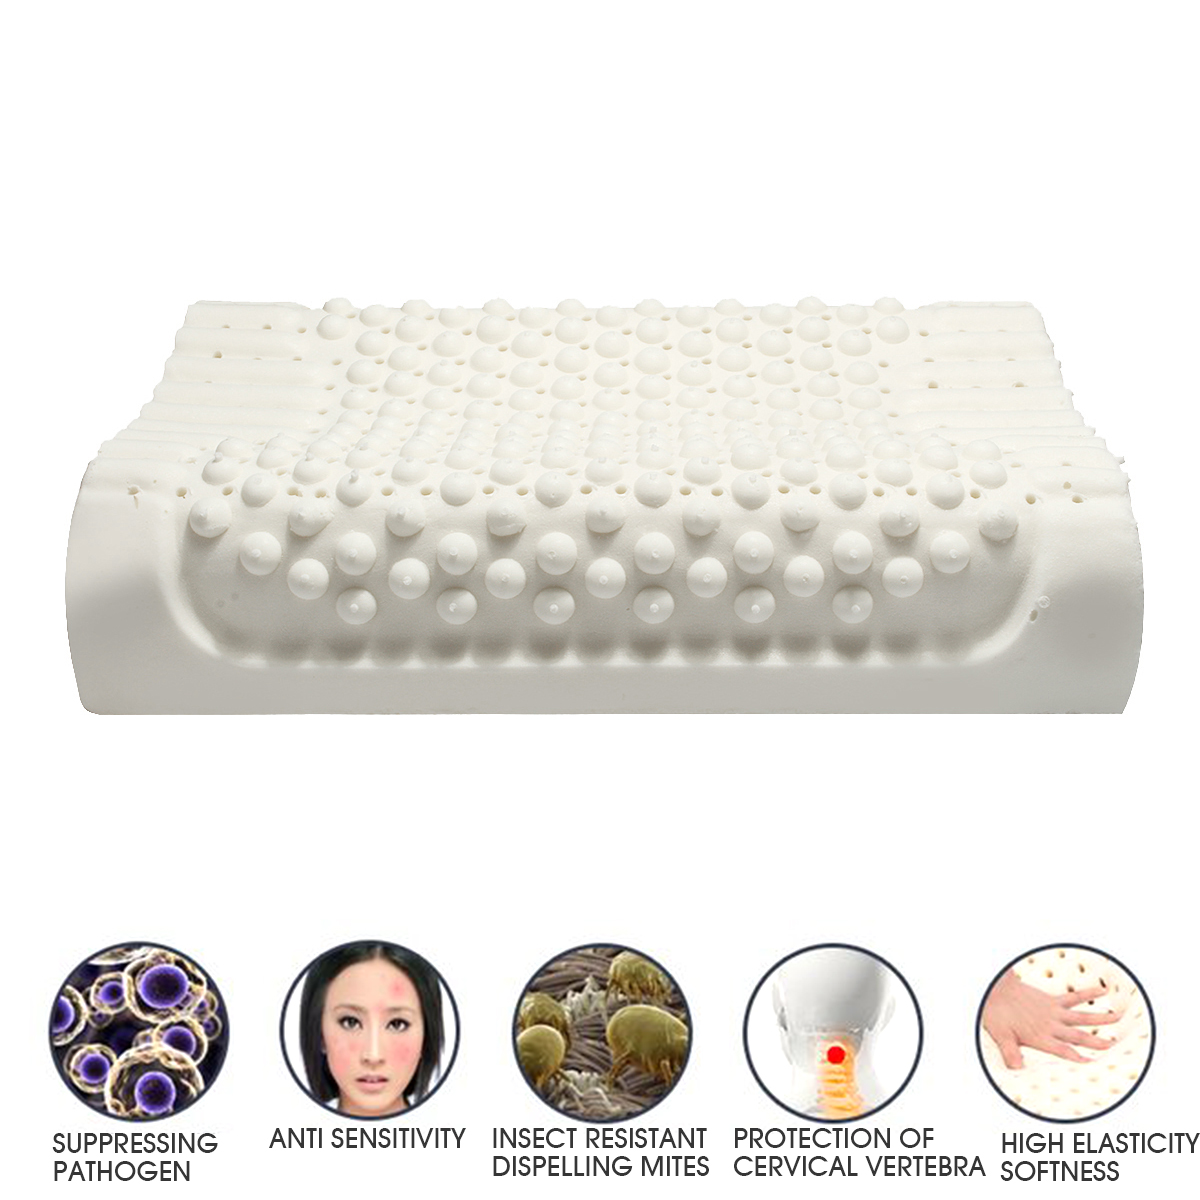 100-Natural-Standard-Latex-Pillow-comfort-for-Neck-Pain-and-Fatigue-Relief-1370340